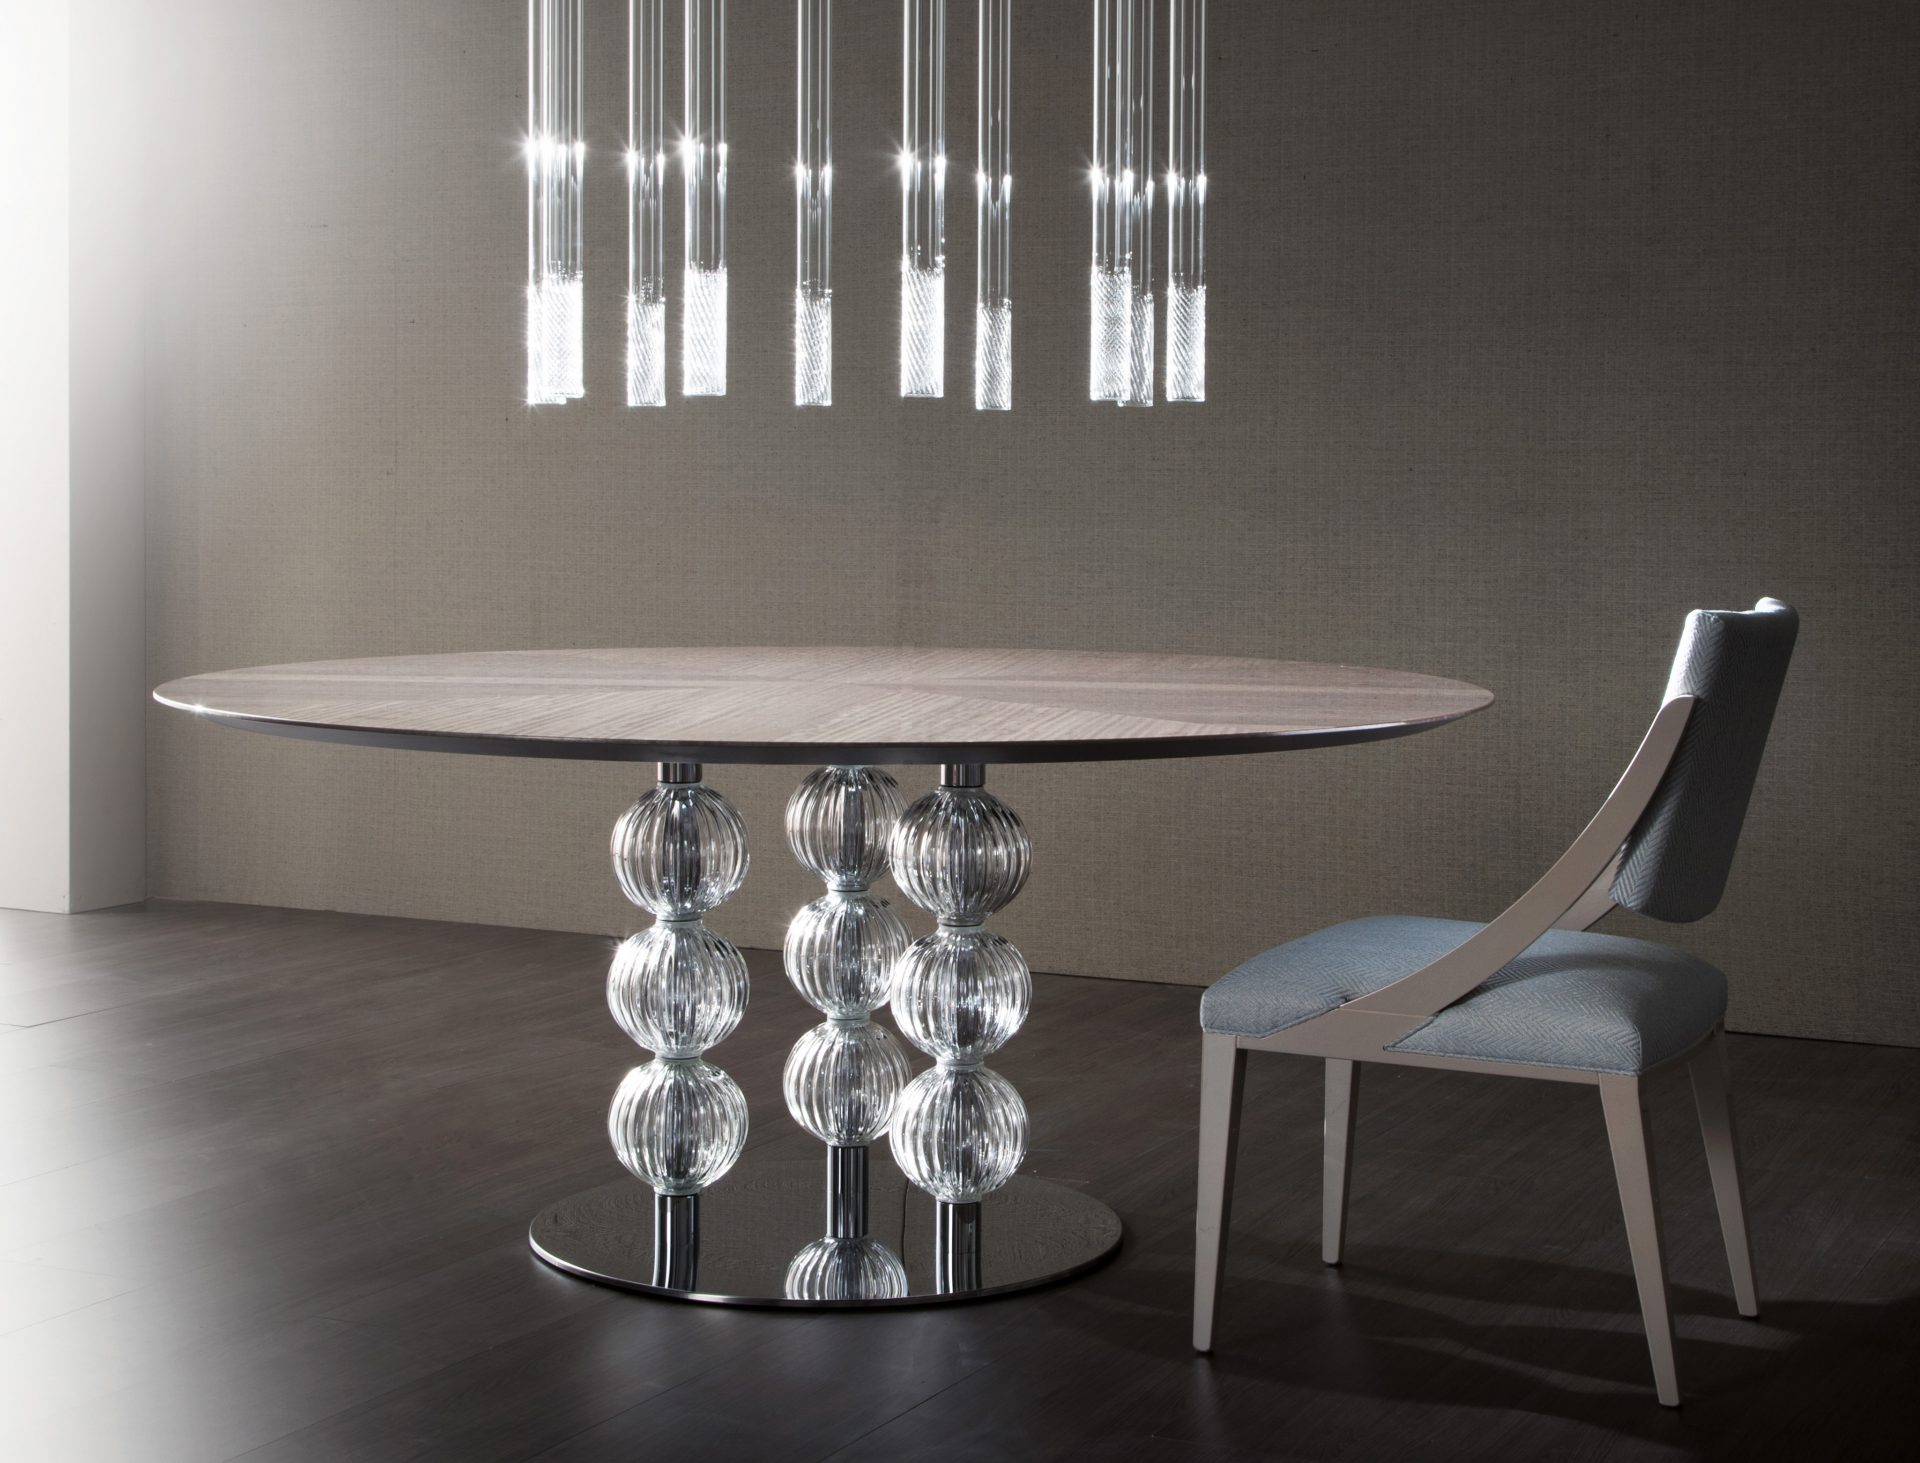 Pasha Dining Table